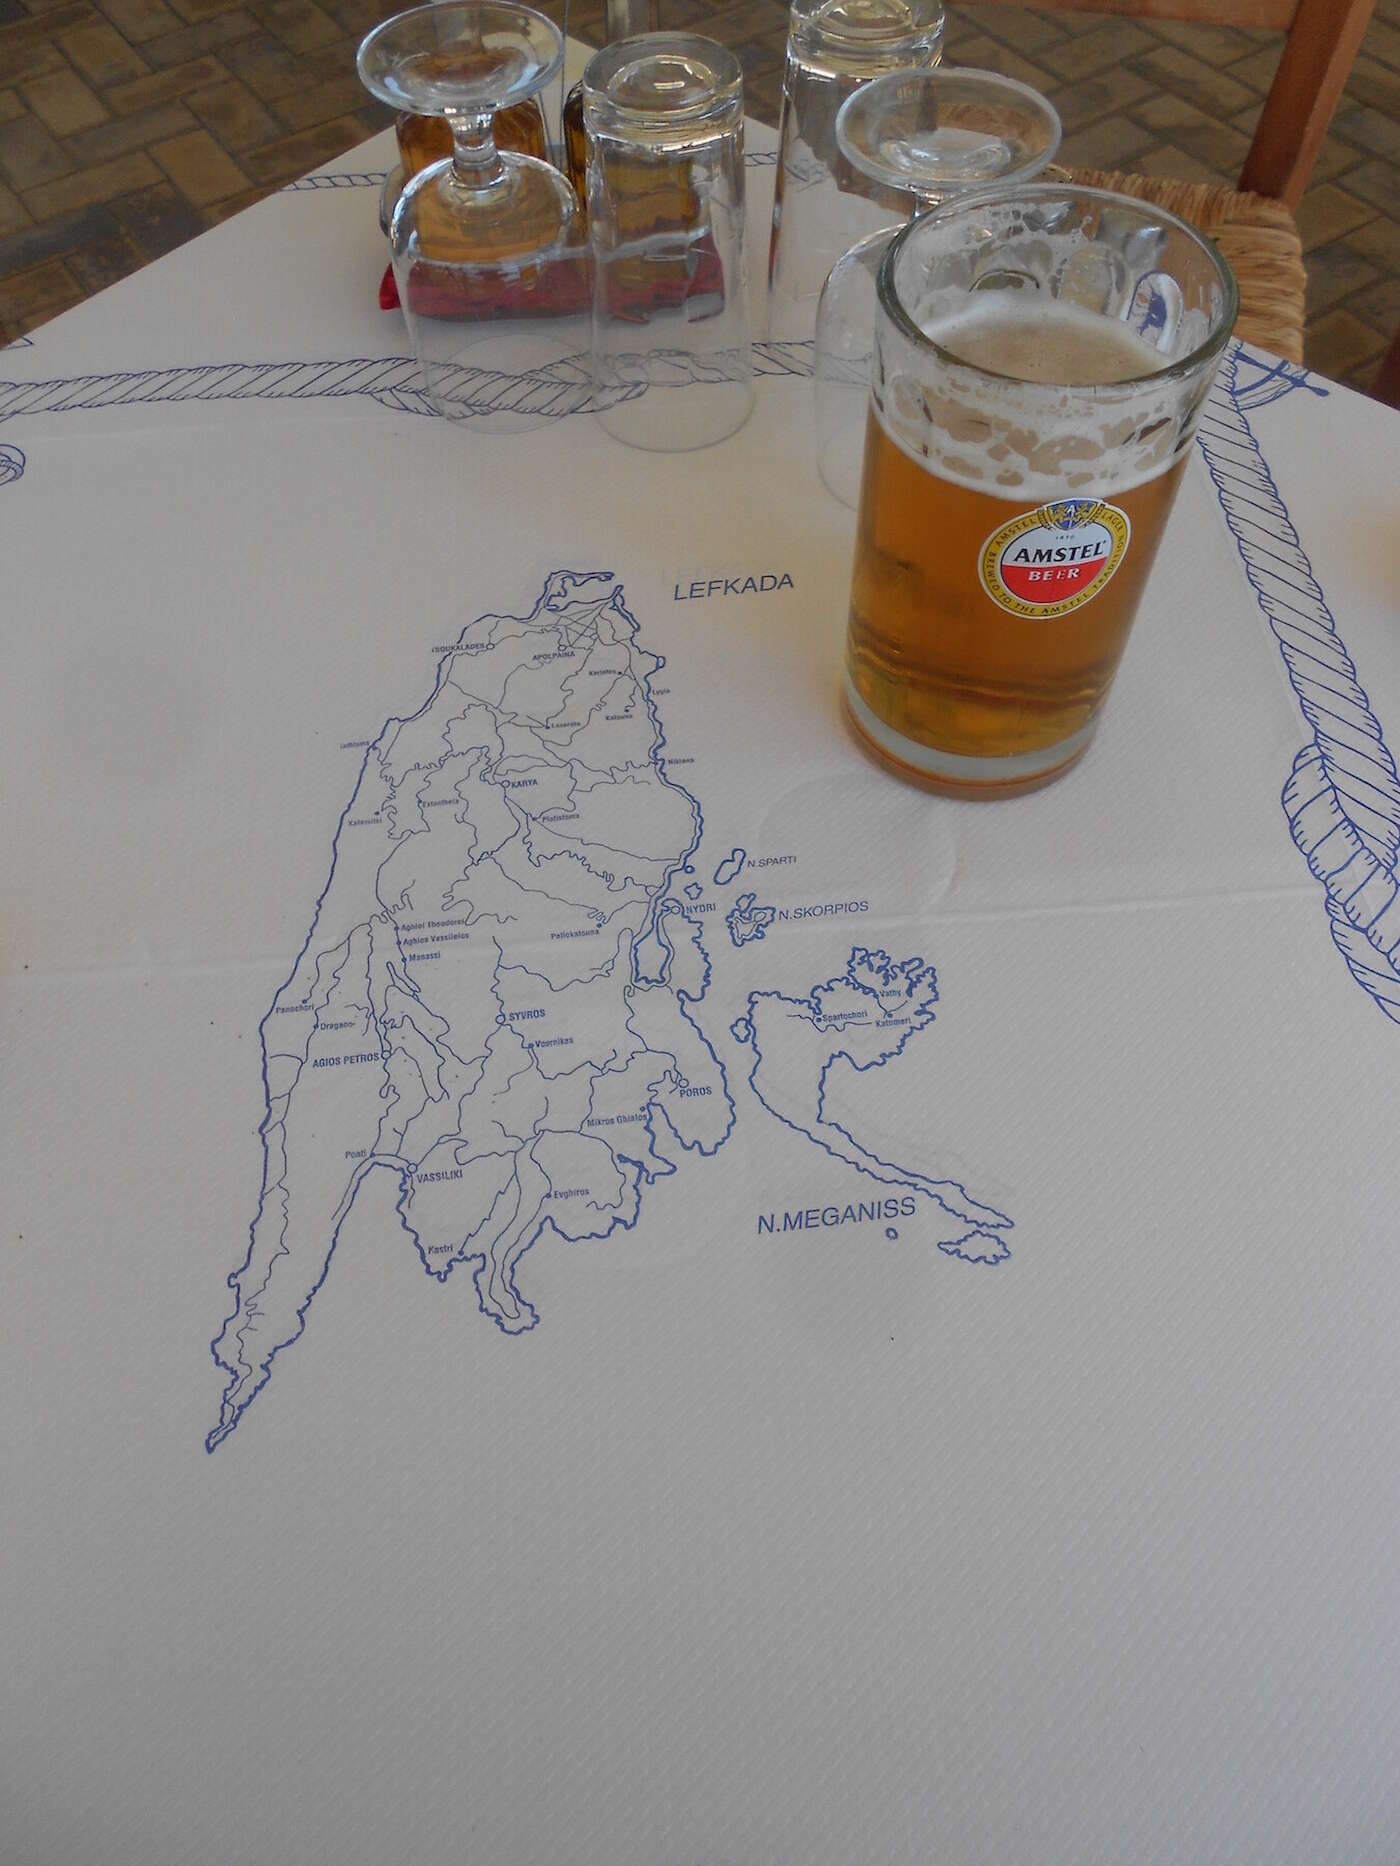 Lefkas map tablecloth, with a beer